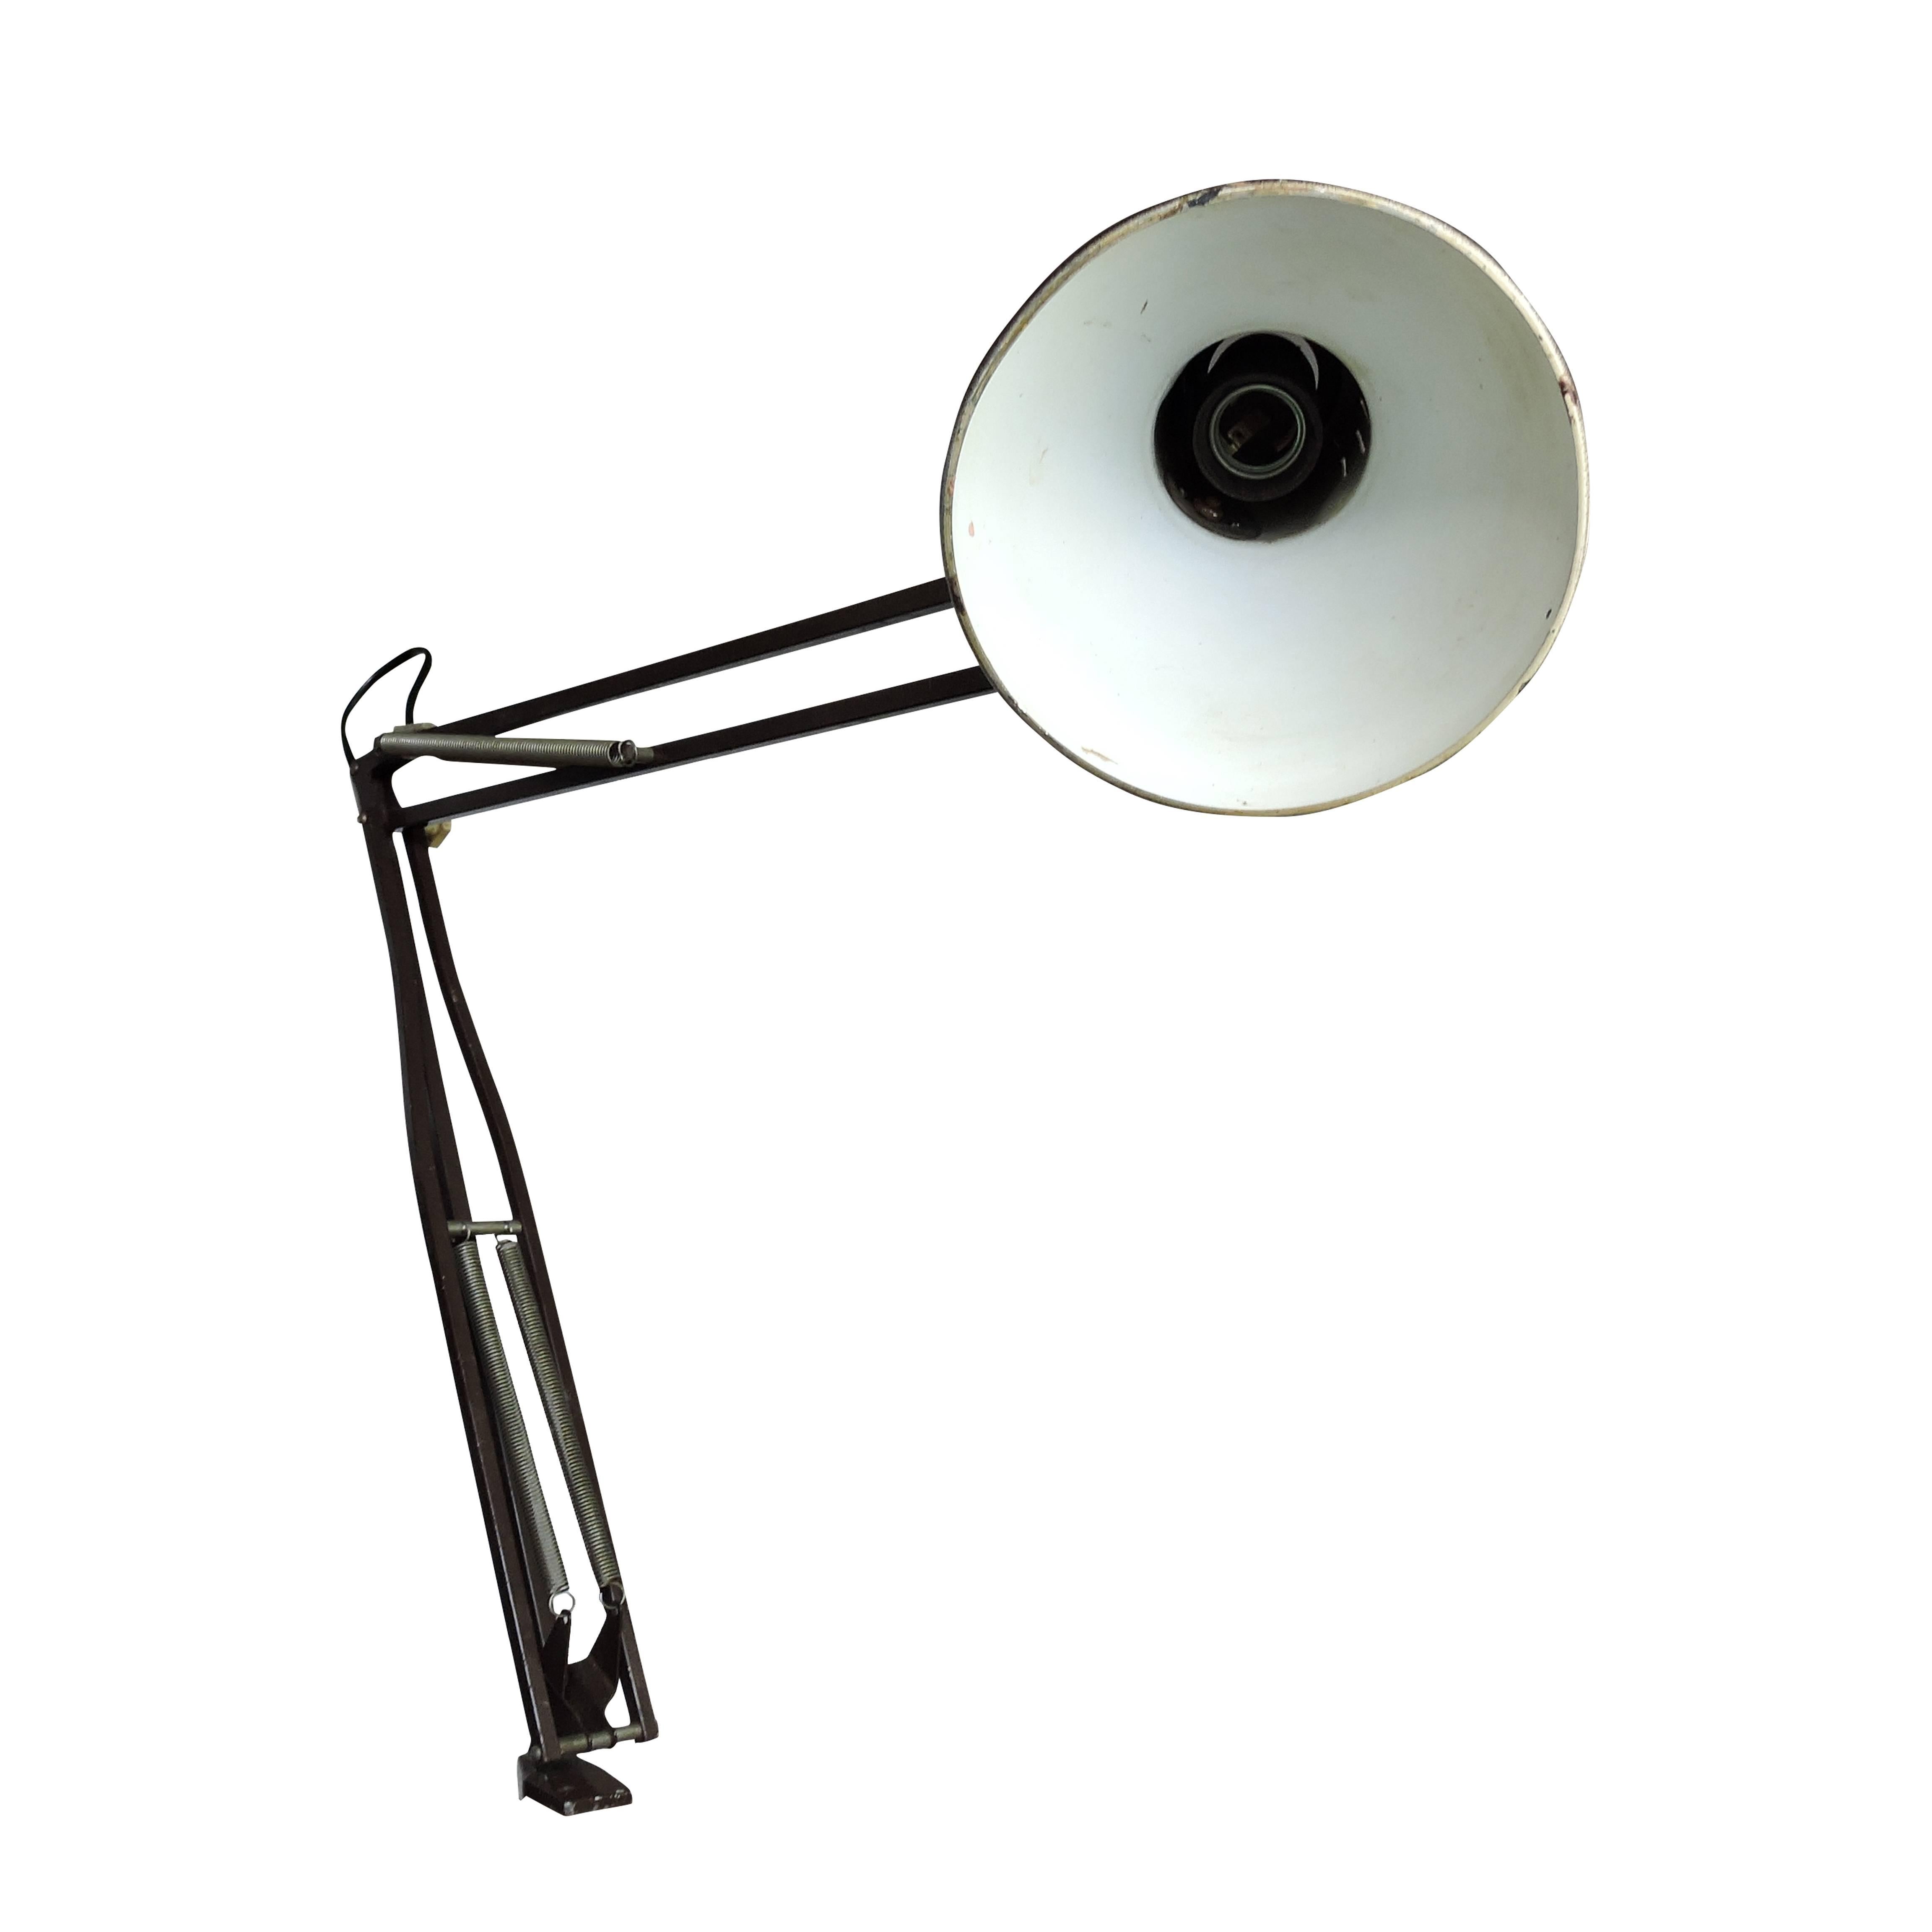 This brown desk lamp from 1960s can be fixed to a desk or shelf using a vice.